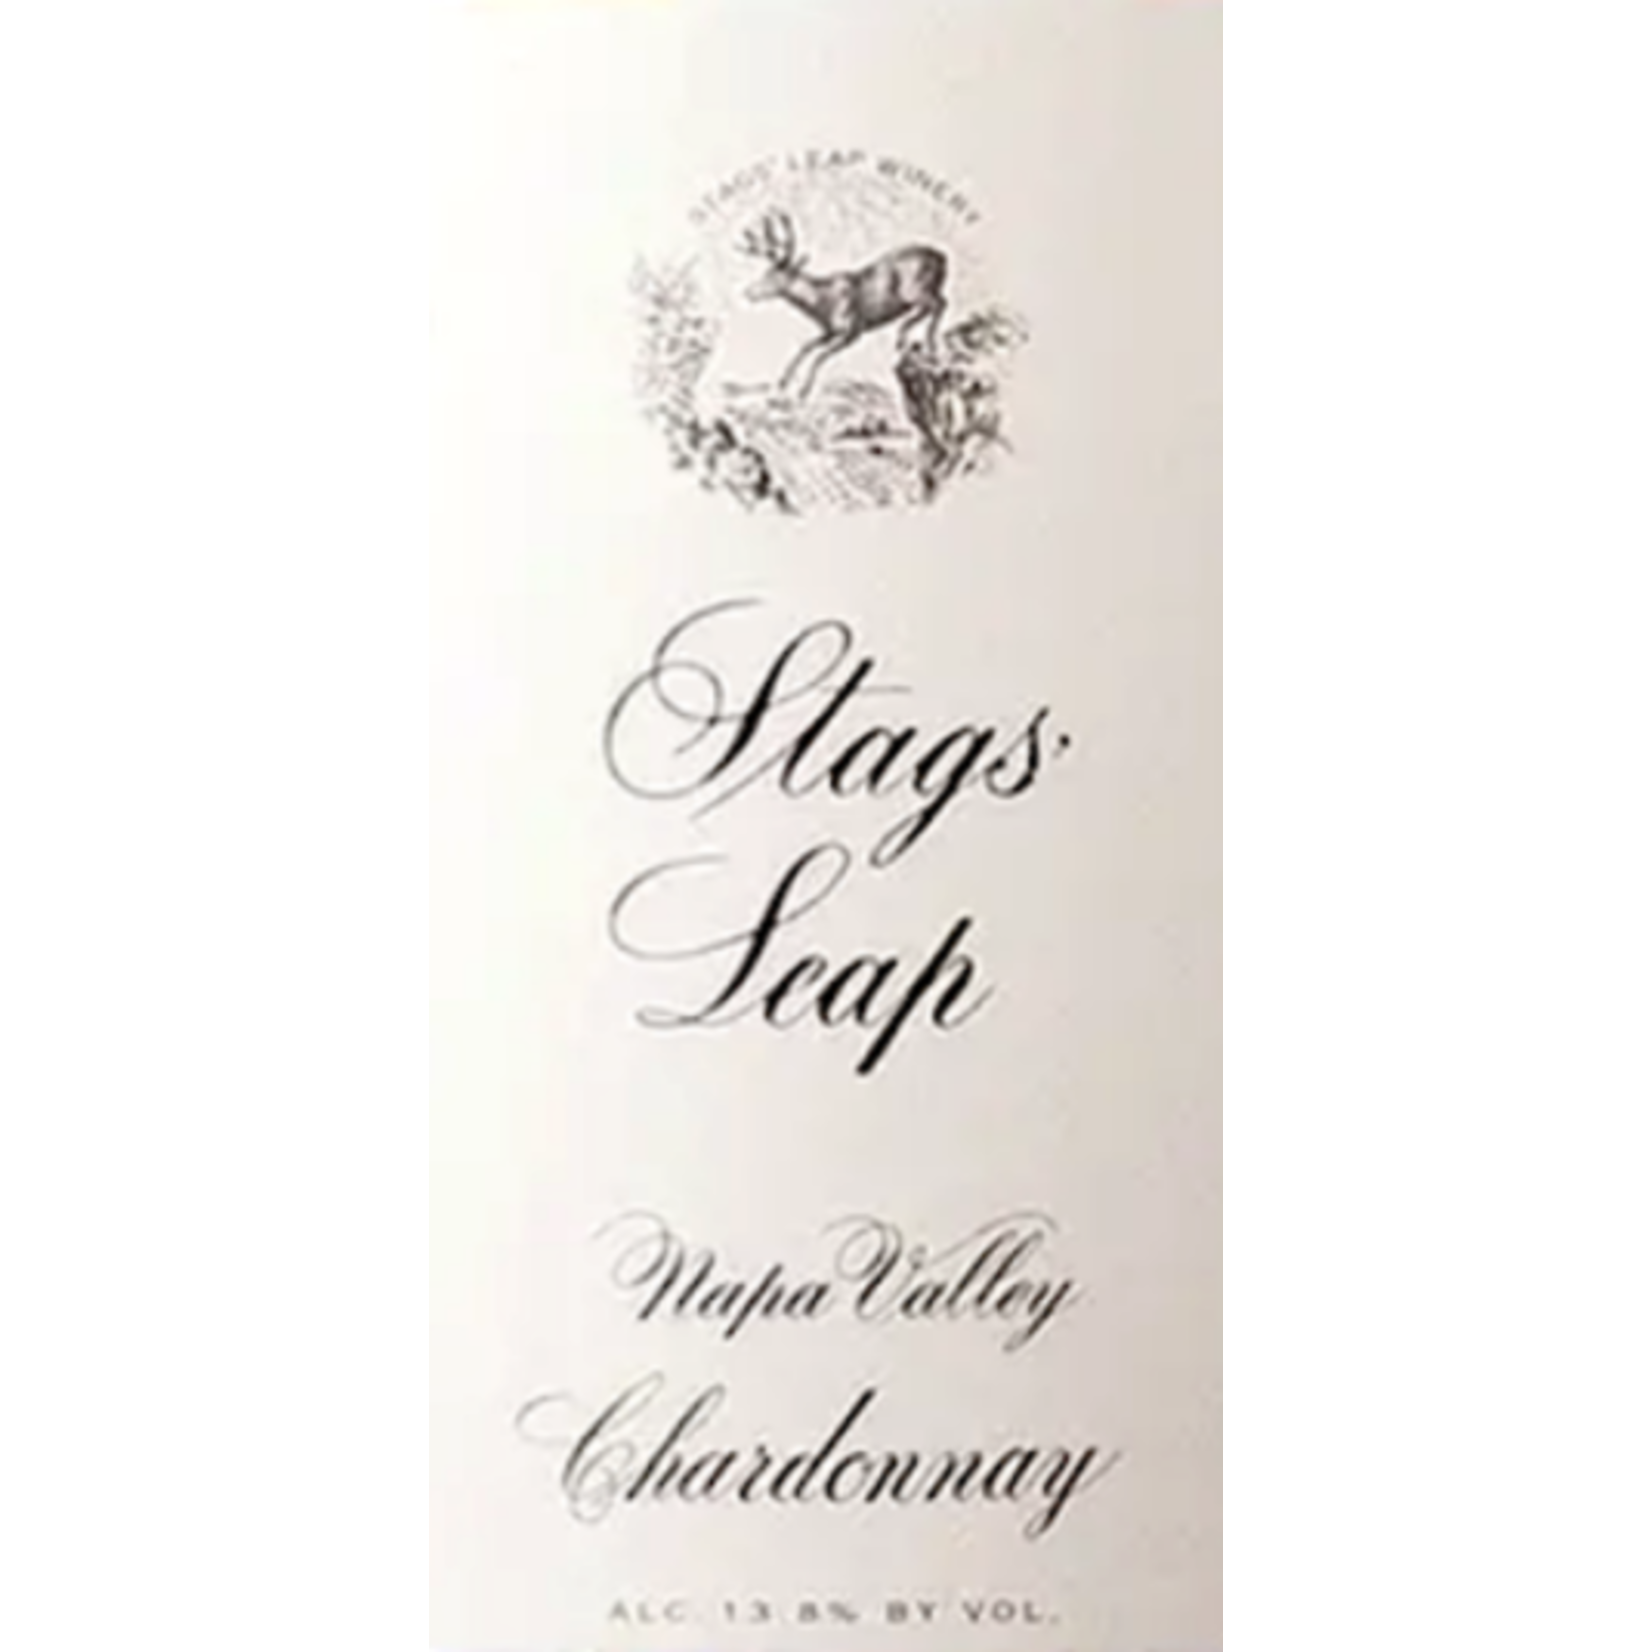 Stags' Leap Winery Stags' Leap Winery Napa Valley Chardonnay 2022 Napa Valley, California